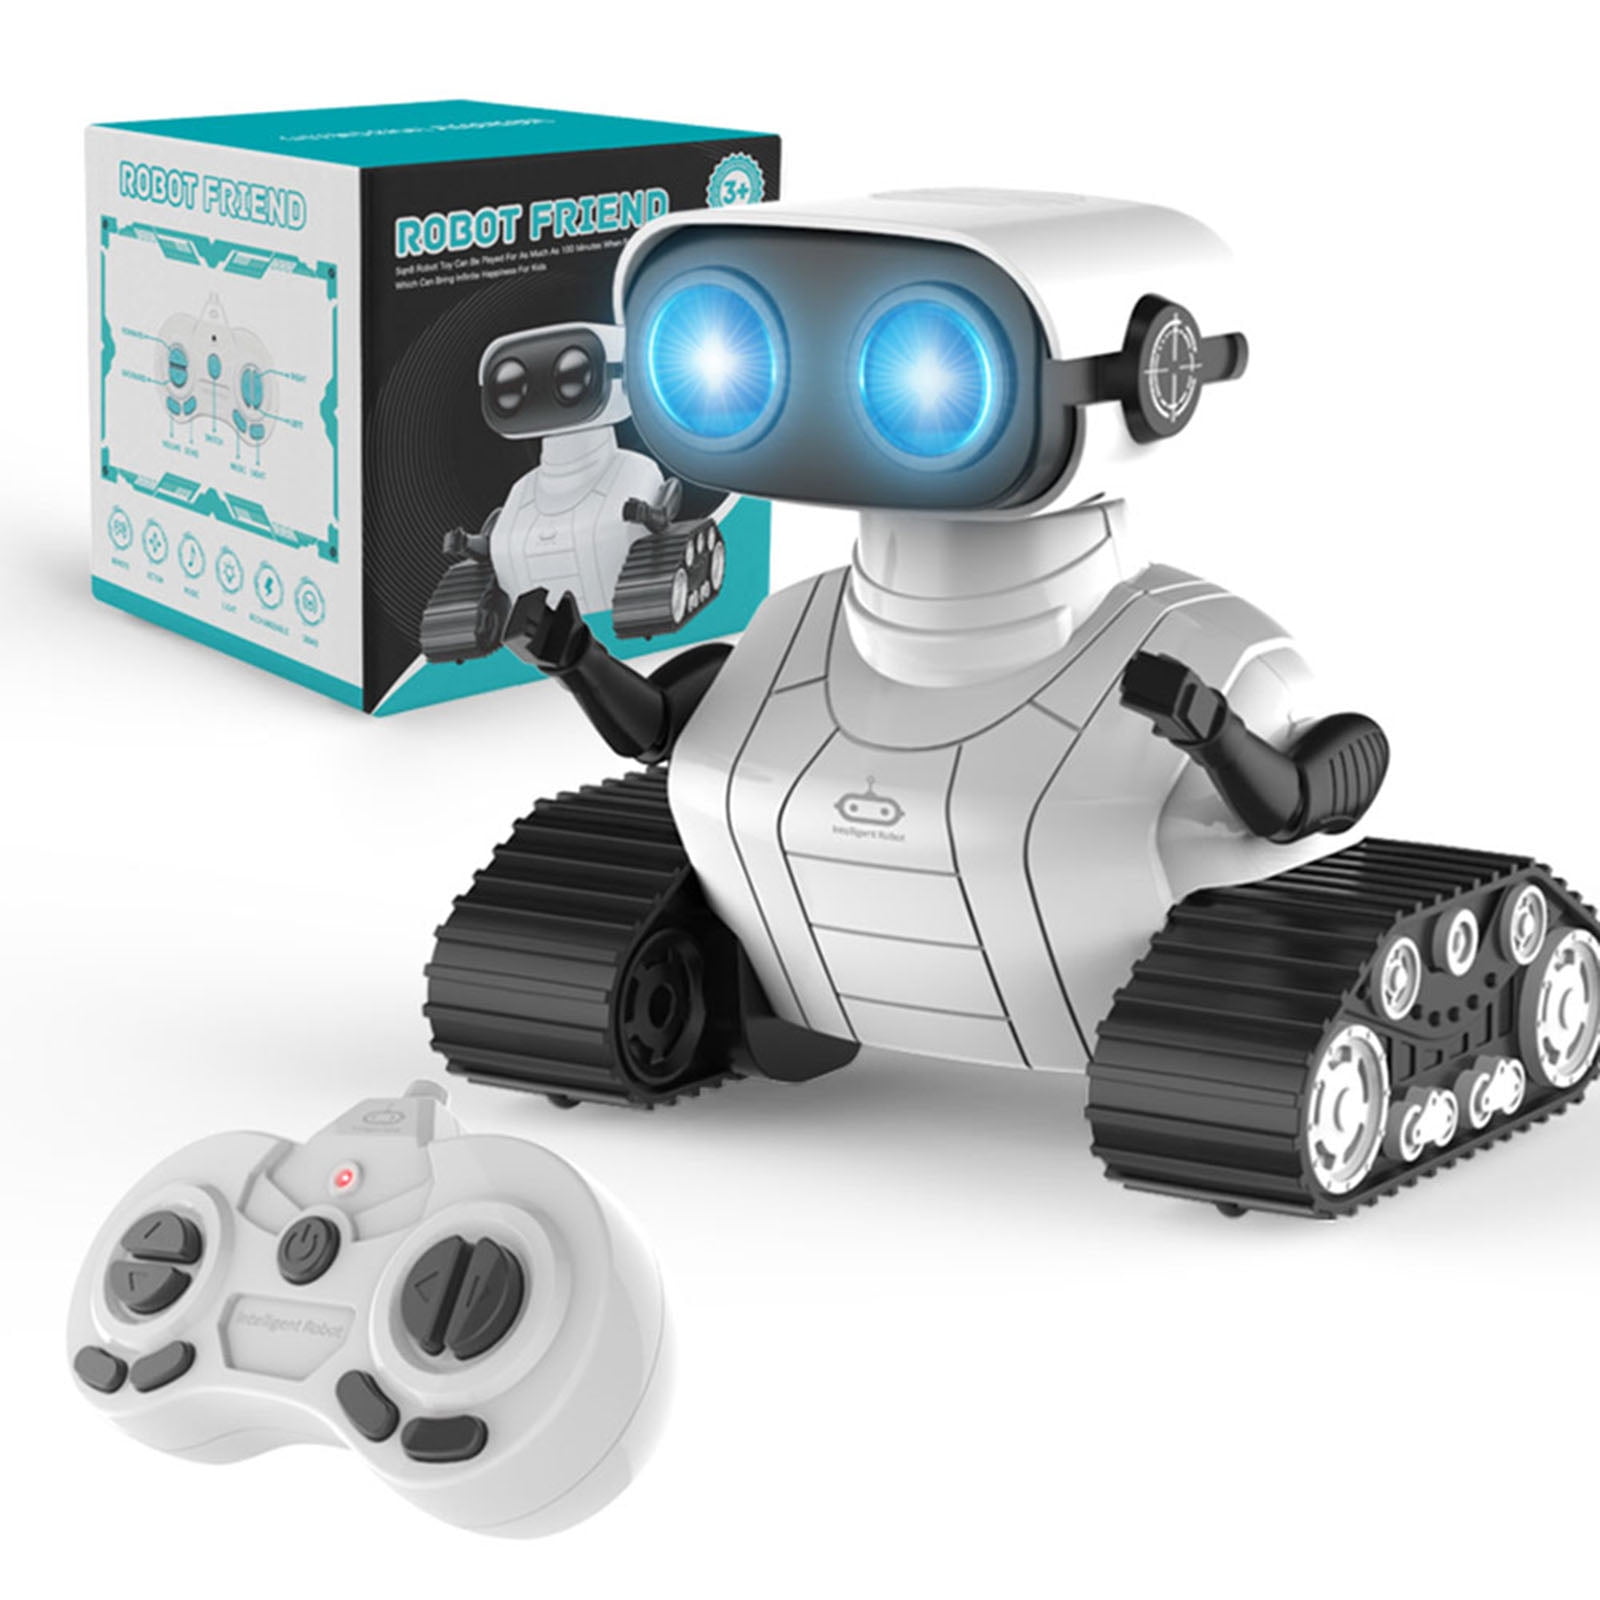  Hamourd Robot Toys for Boys Girls, Rechargeable Remote Control Emo  Robots with Auto-Demonstration, Flexible Head & Arms, Dance Moves, Music,  Shining LED Eyes for 5+ Years Old Kids : Toys 